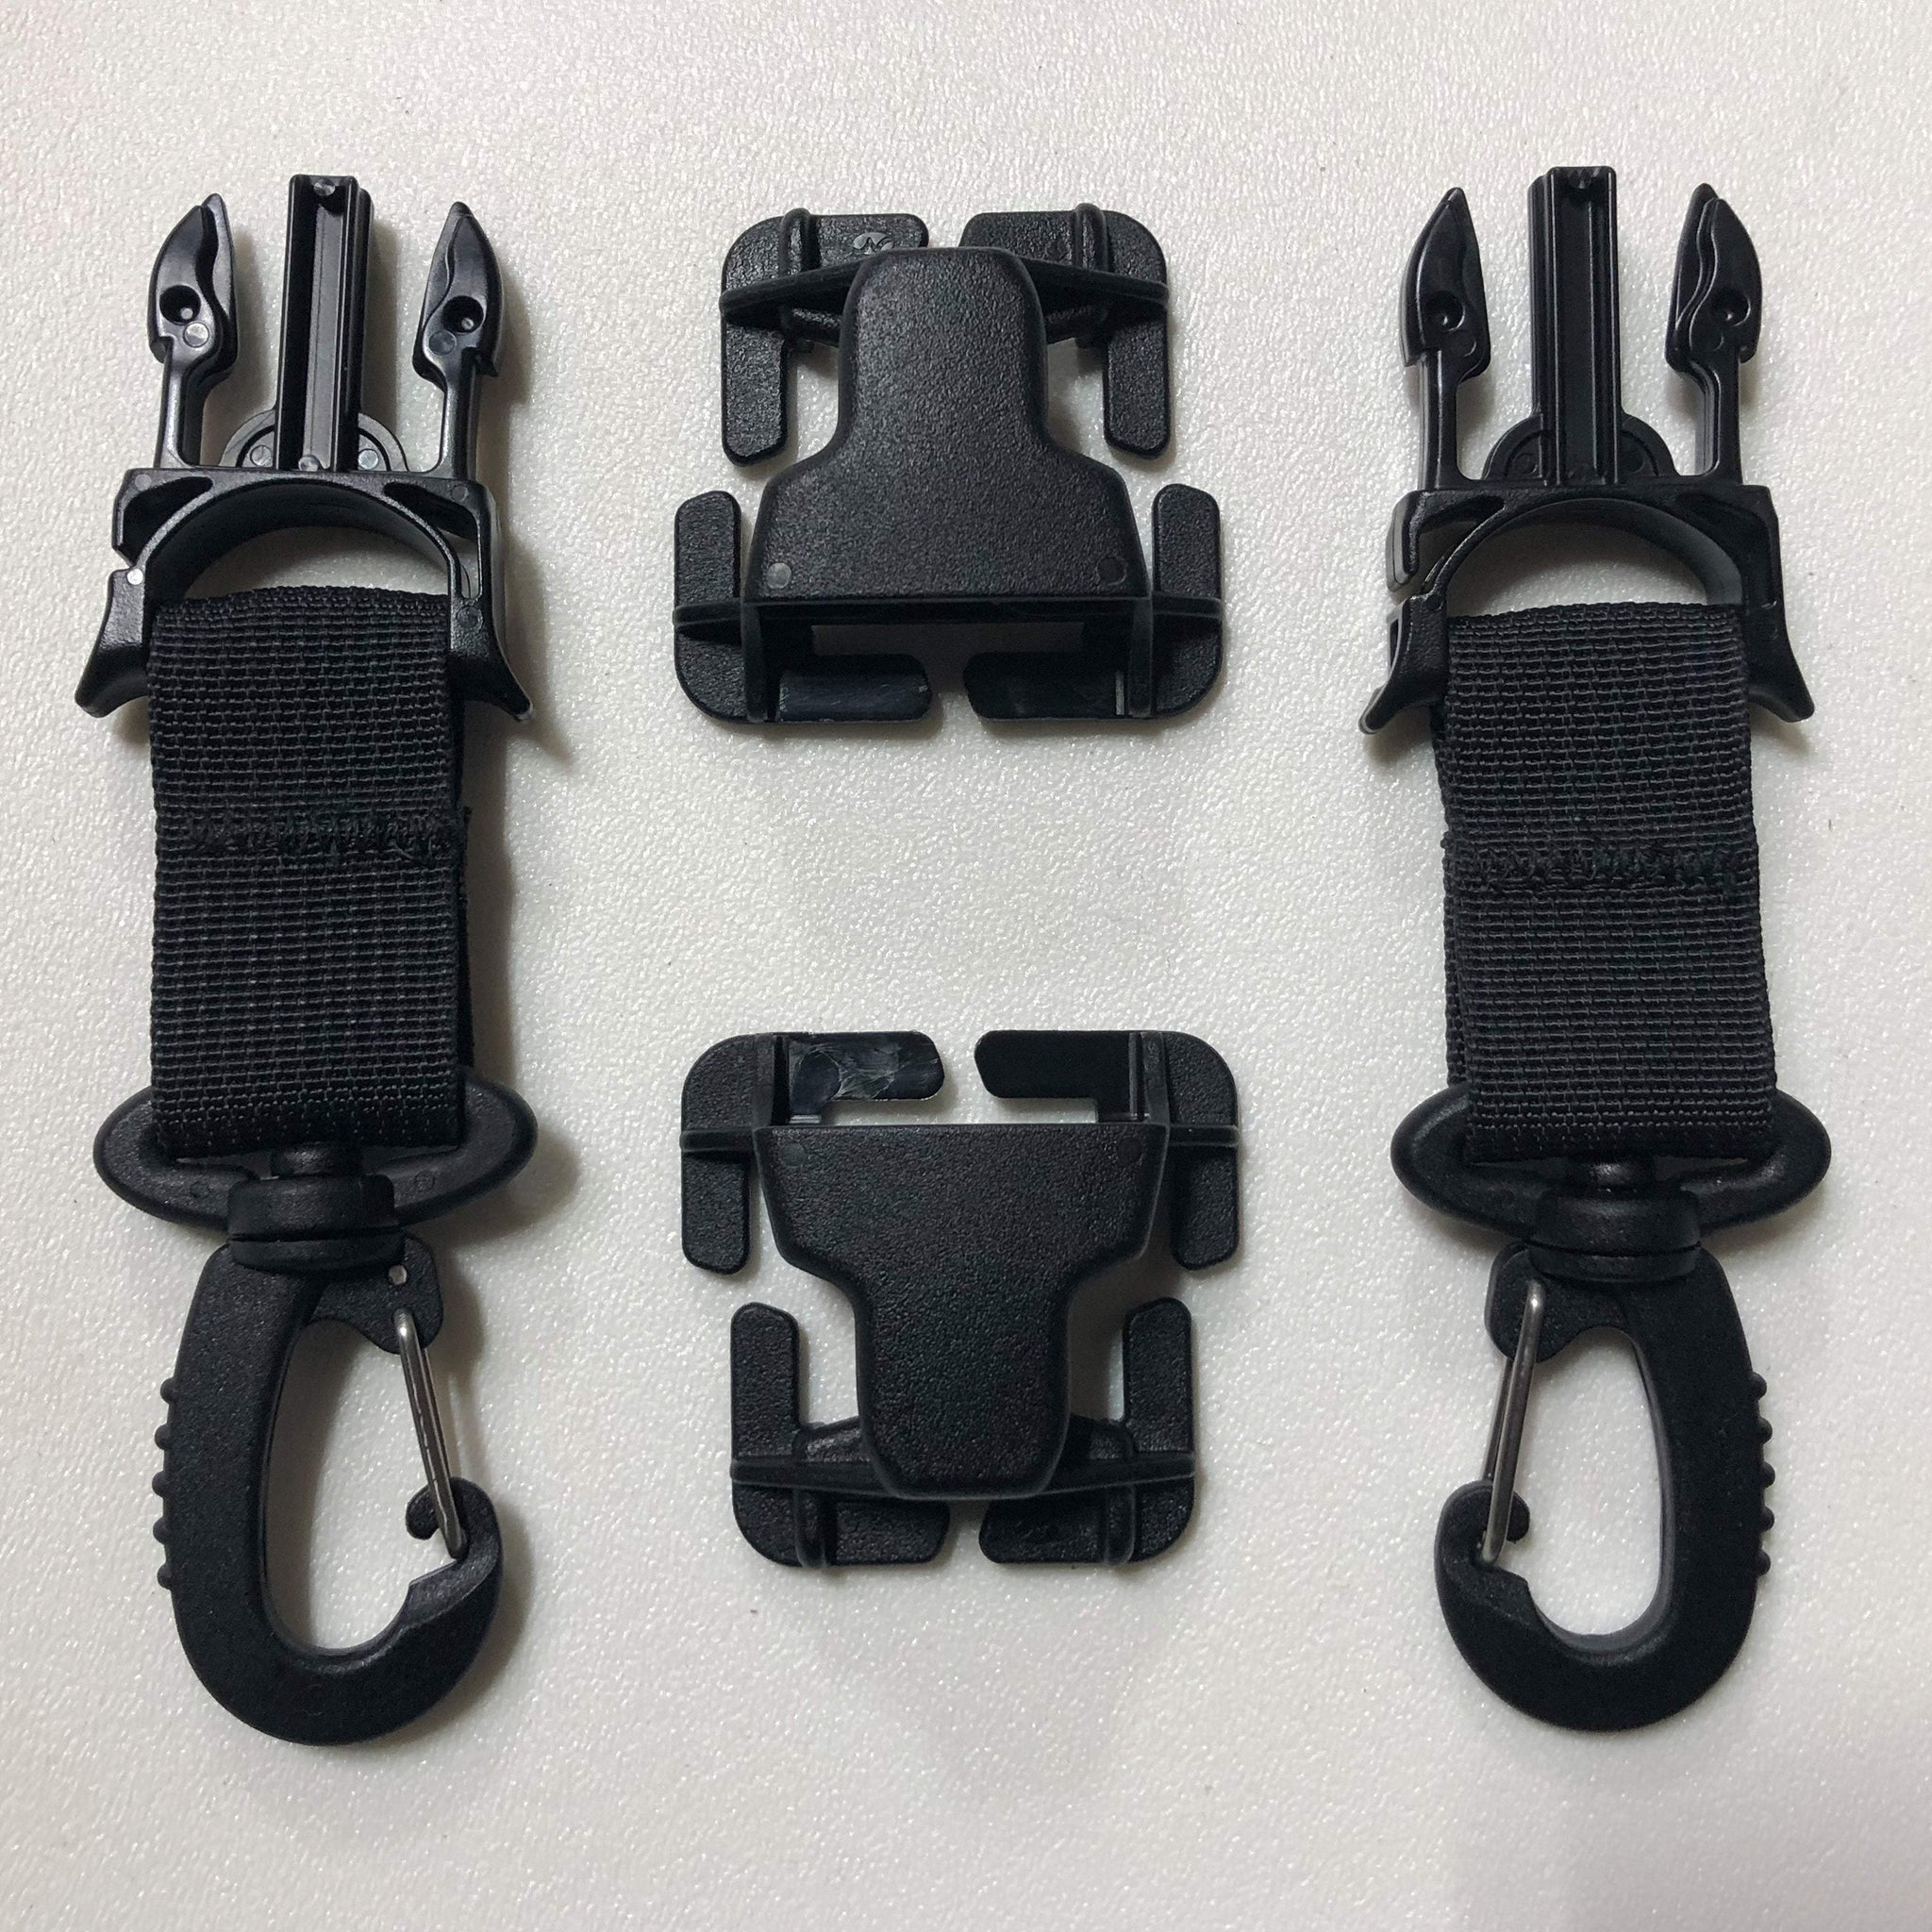 Molle Attachments, Bartact, PALS/MOLLE T-Bar & Heavy Duty Acetal Swivel Hooks (Pair of 2) - Black MASHHB